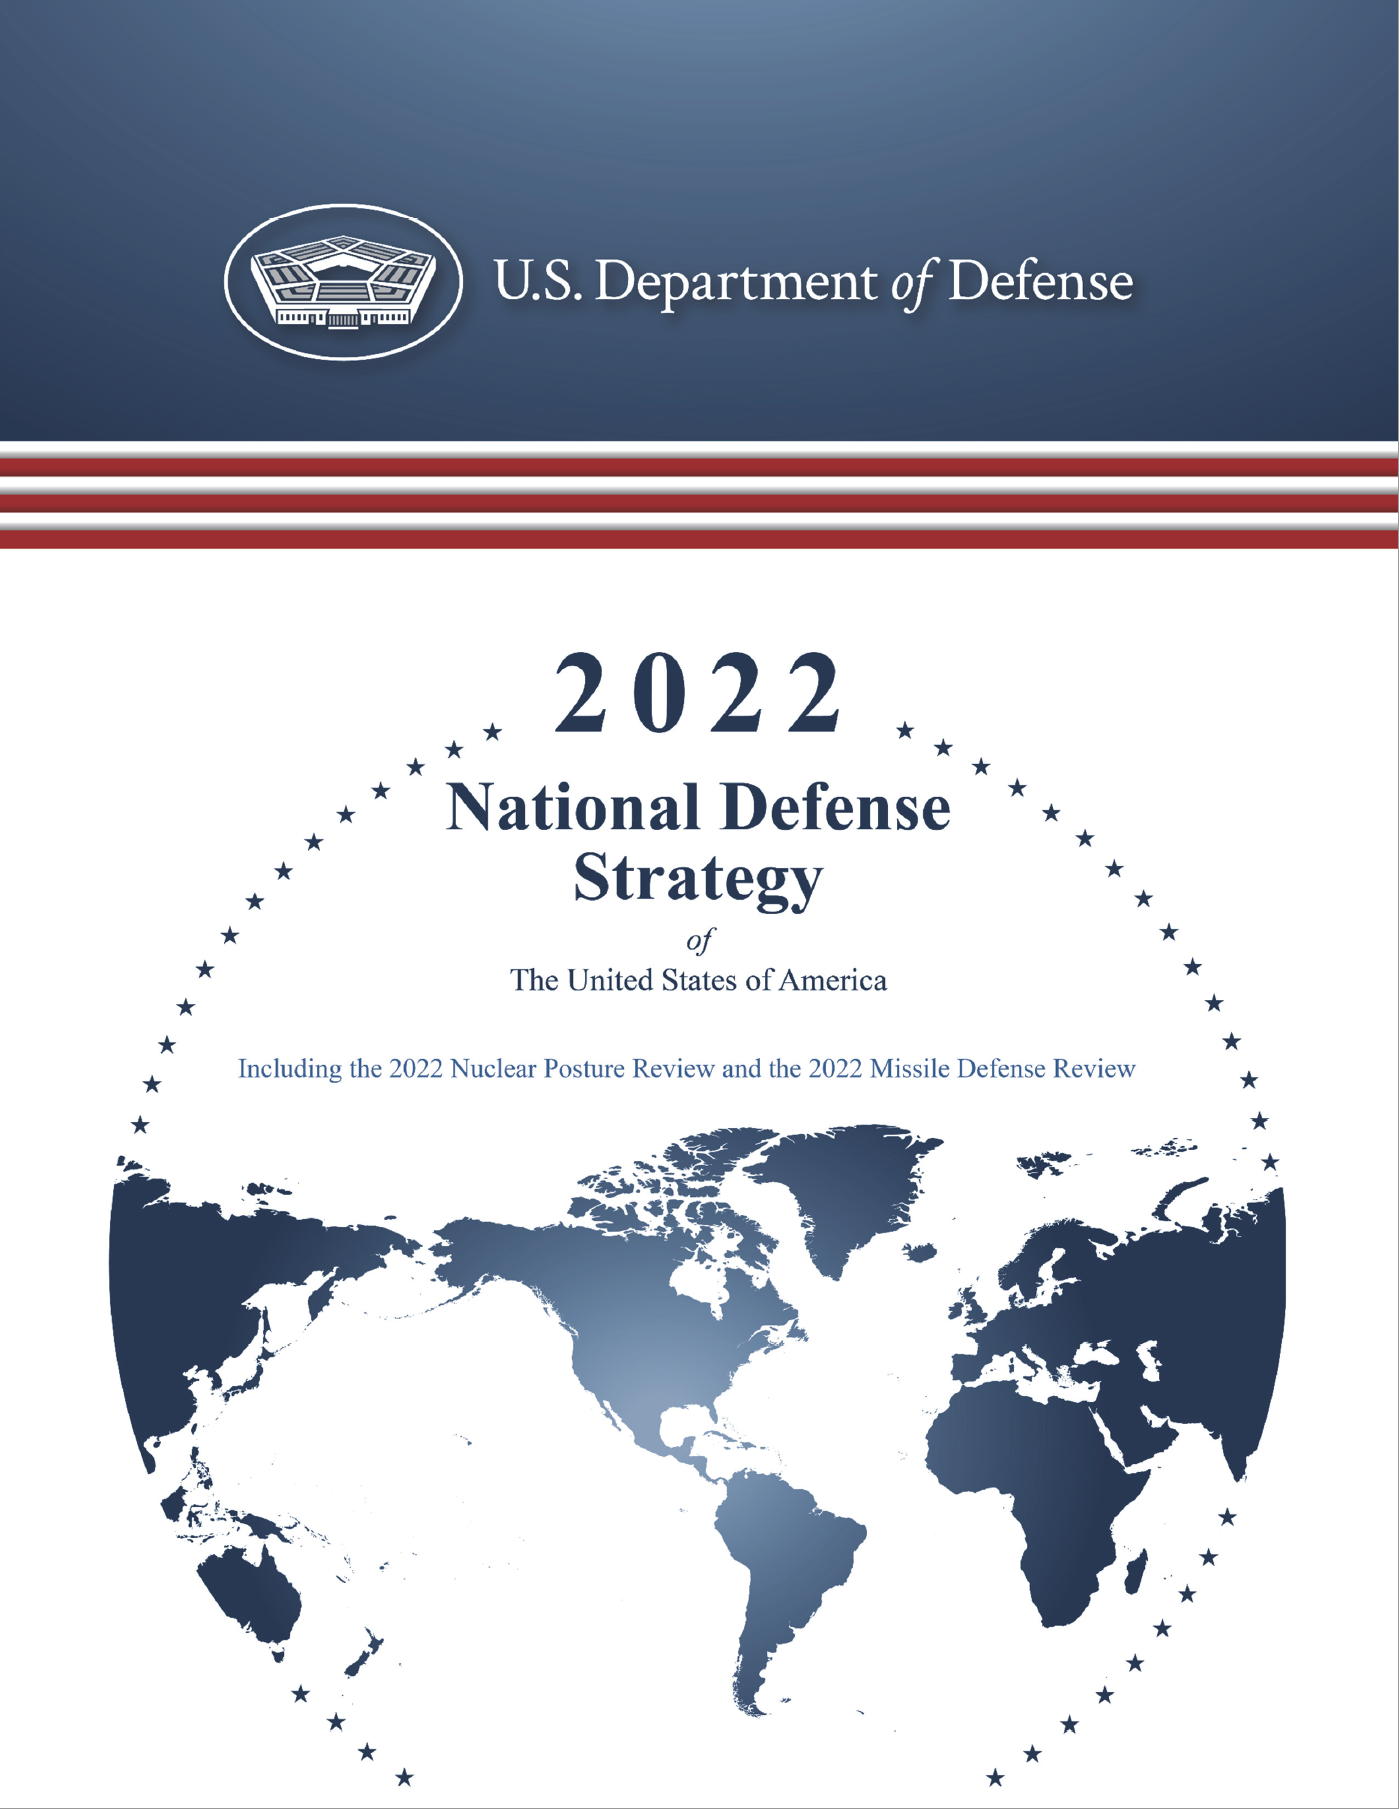 New National Defense Strategy Published